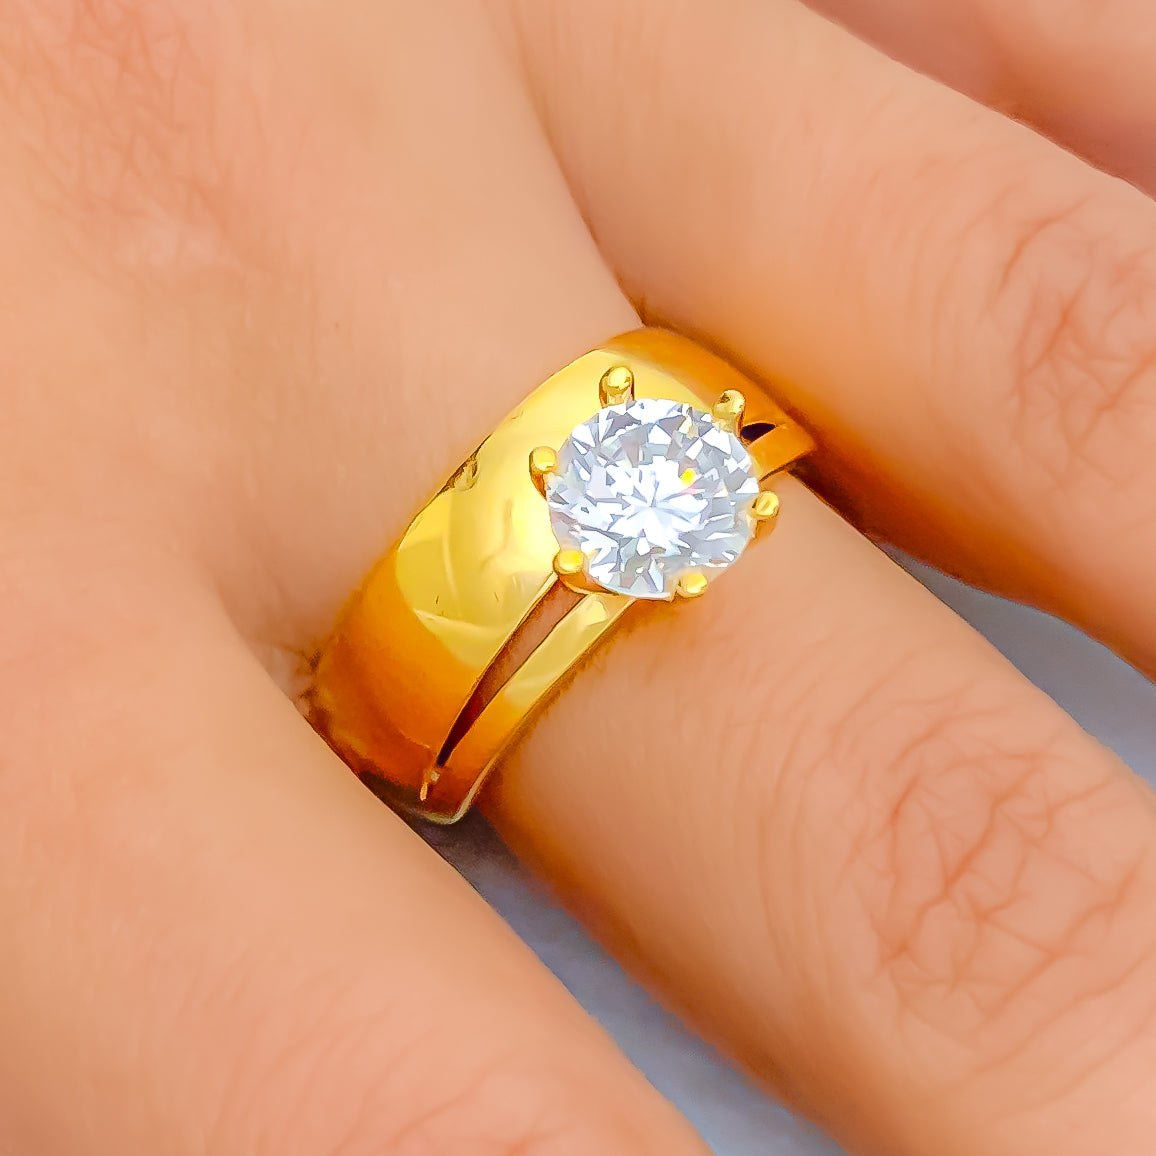 22K gold fansy and most adorable rings NJ-e0198 with hallmark jewellery